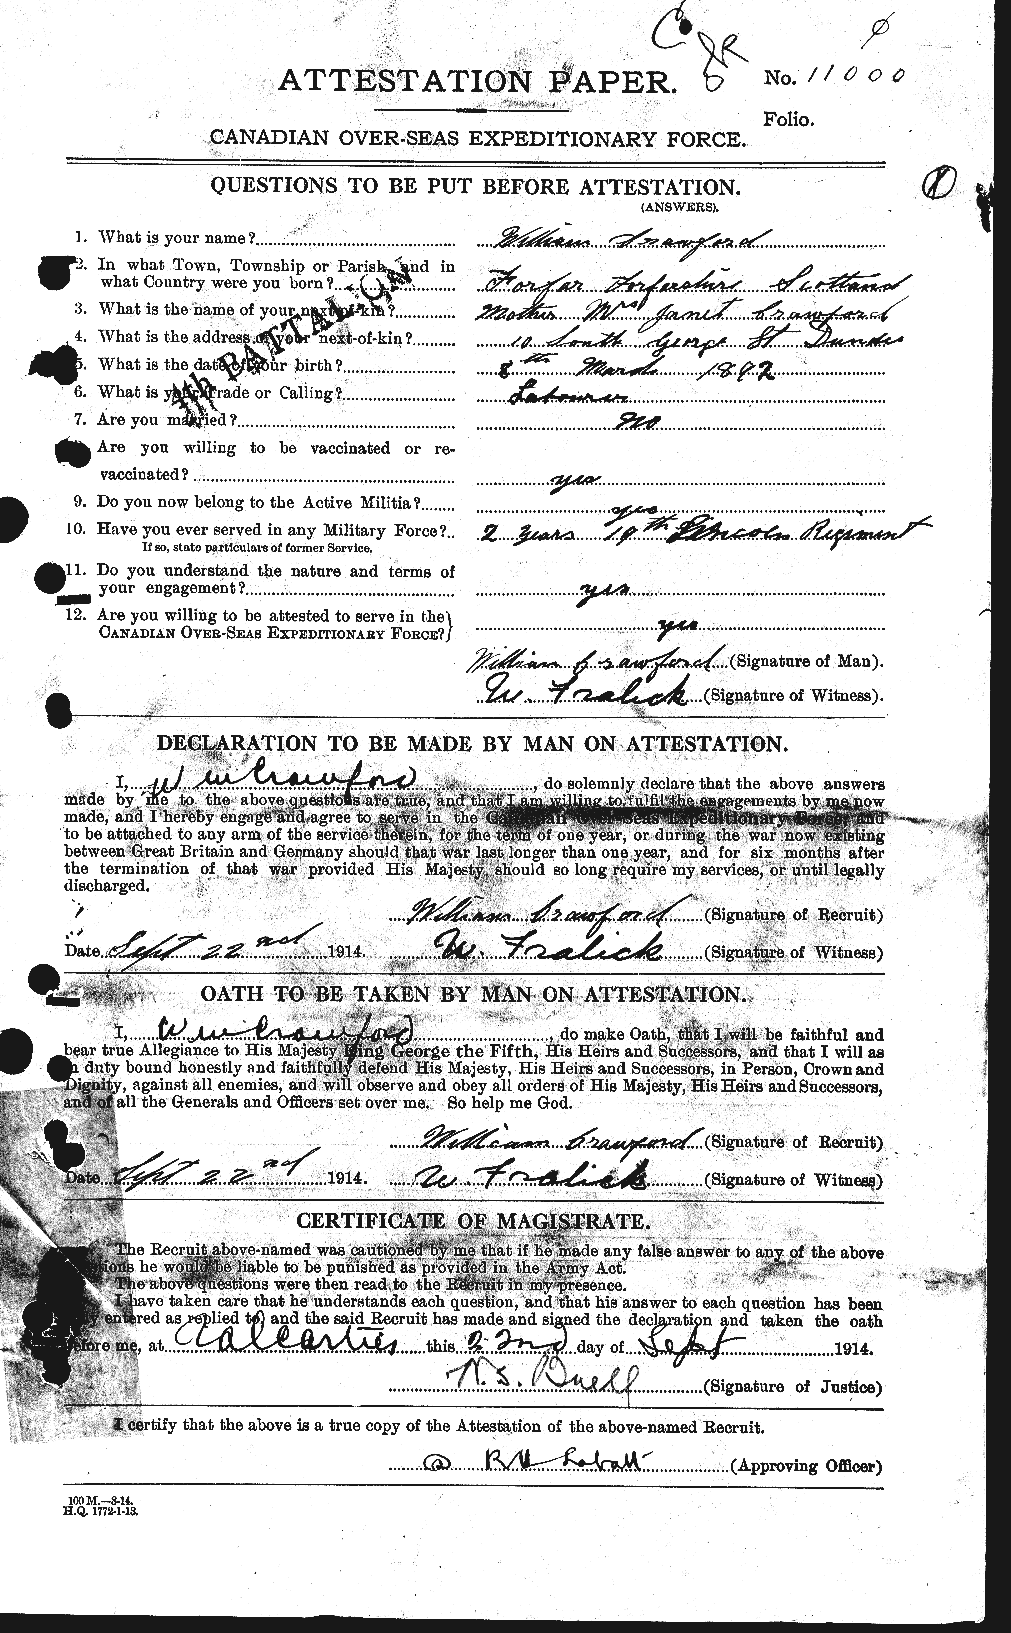 Personnel Records of the First World War - CEF 061162a